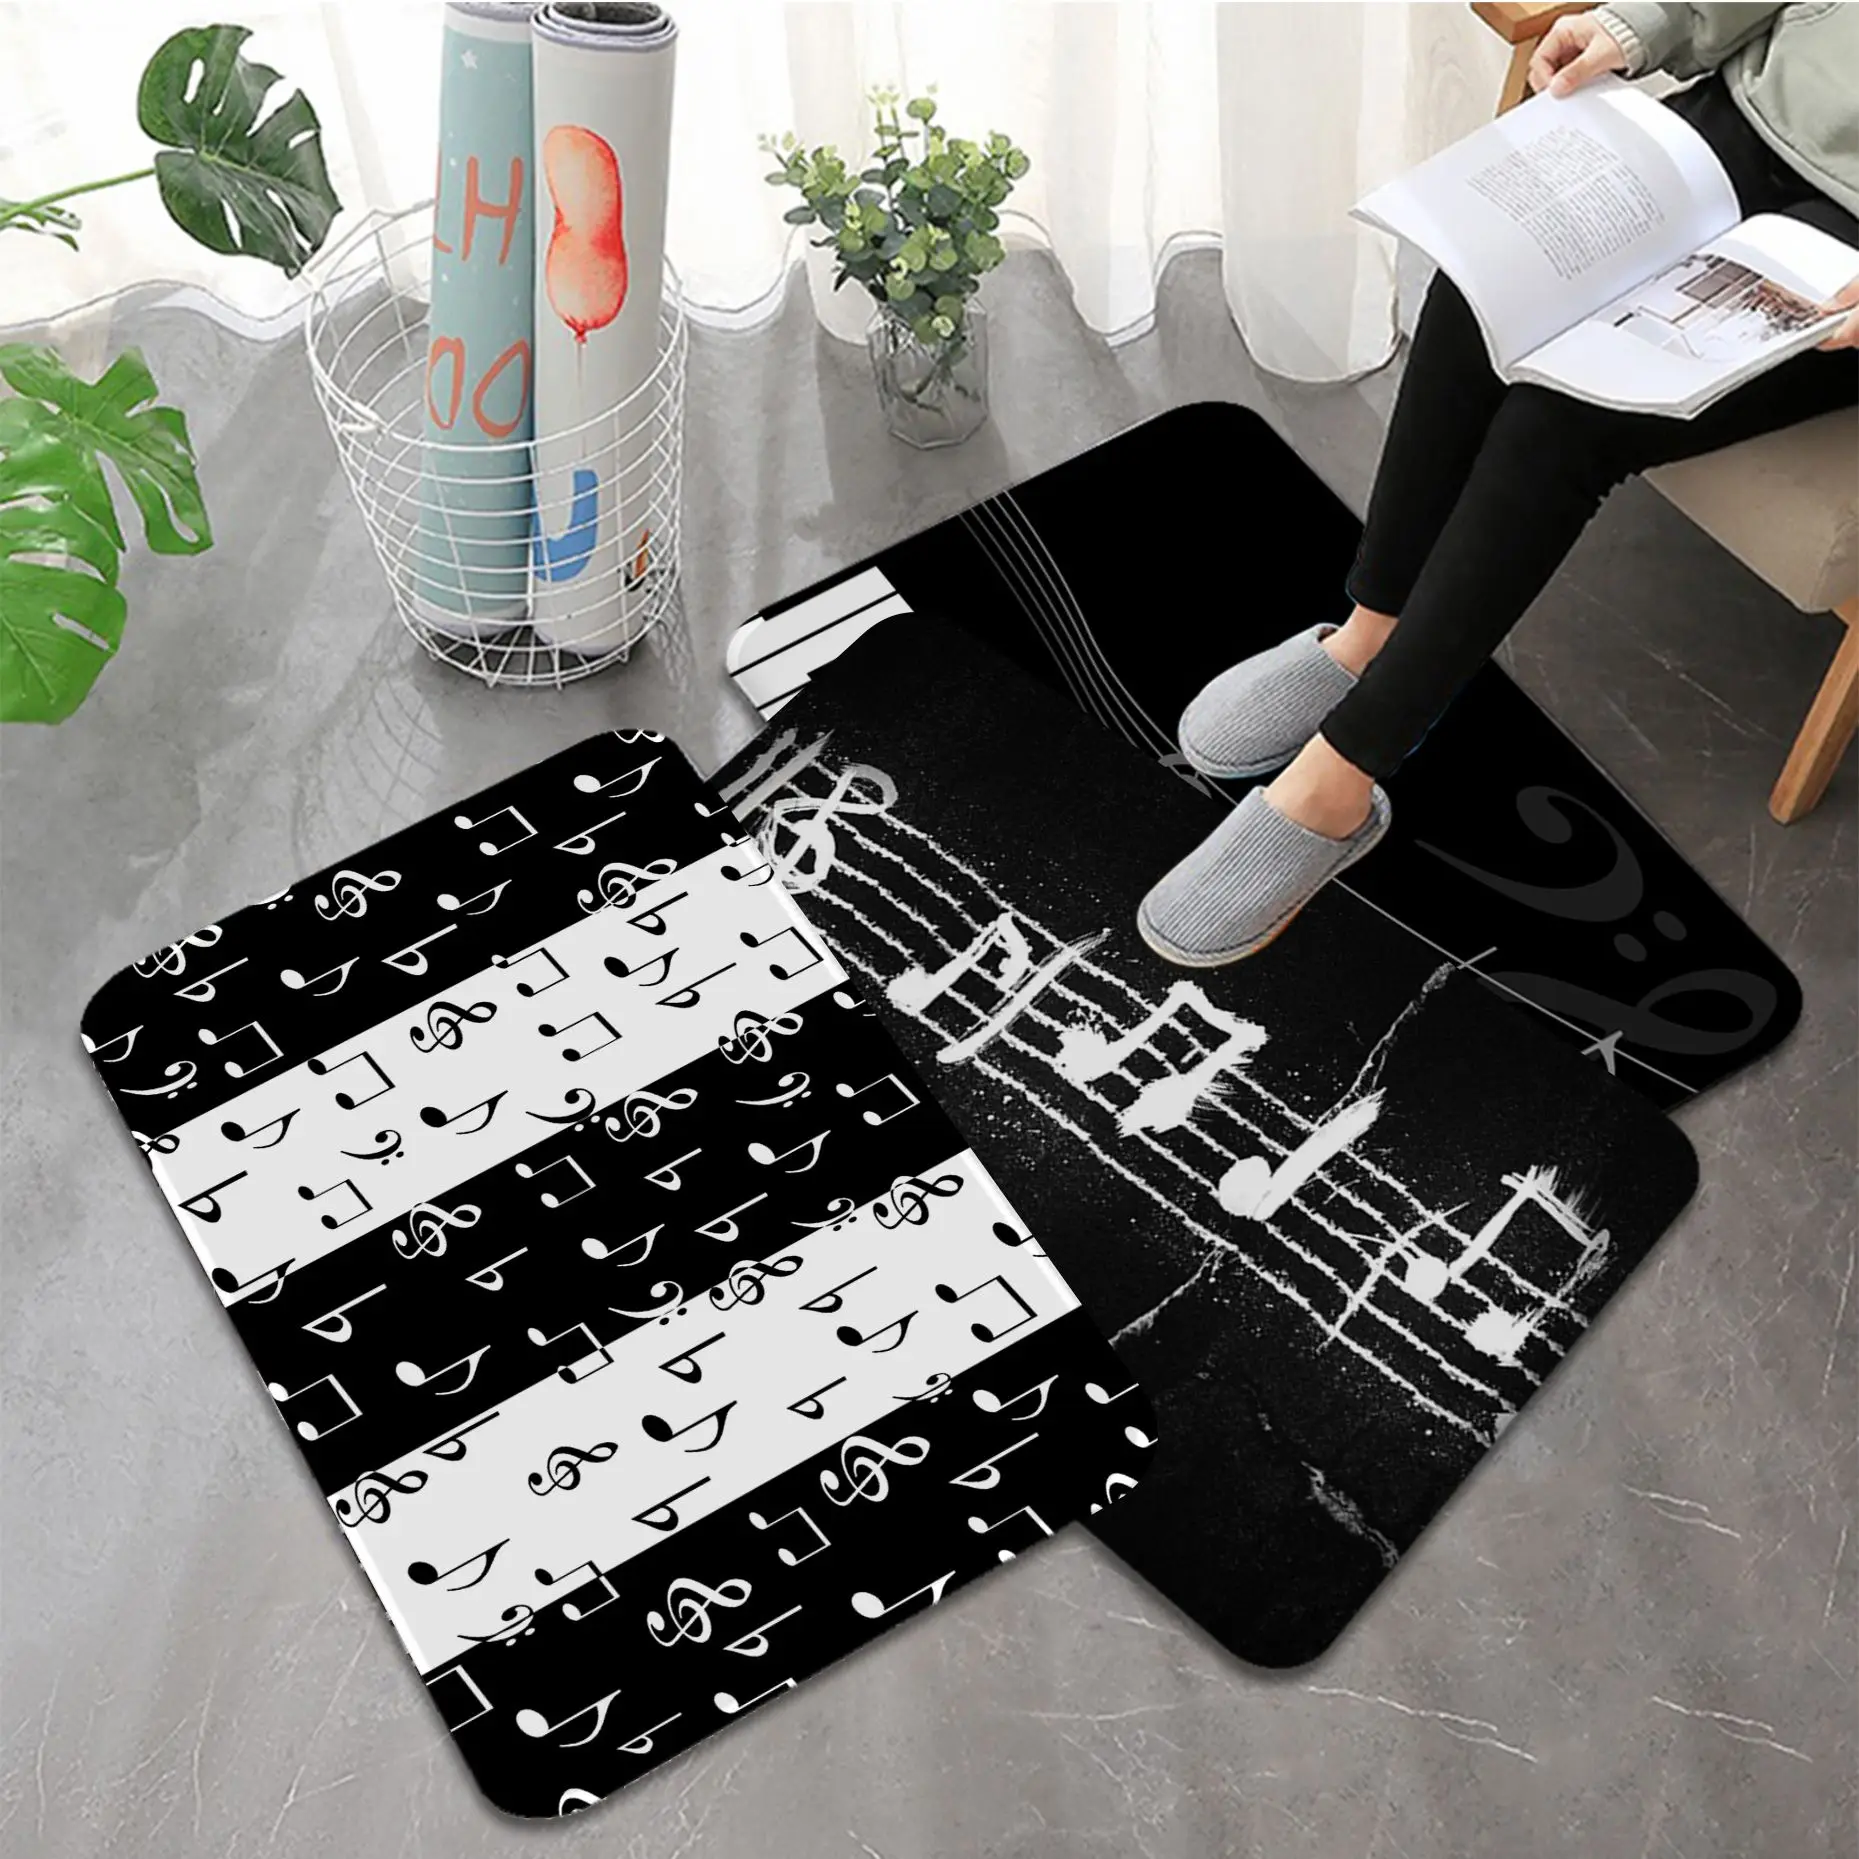 

Music Notes Piano Key Printed Flannel Floor Mat Bathroom Decor Carpet Non-Slip For Living Room Kitchen welcome Doormat